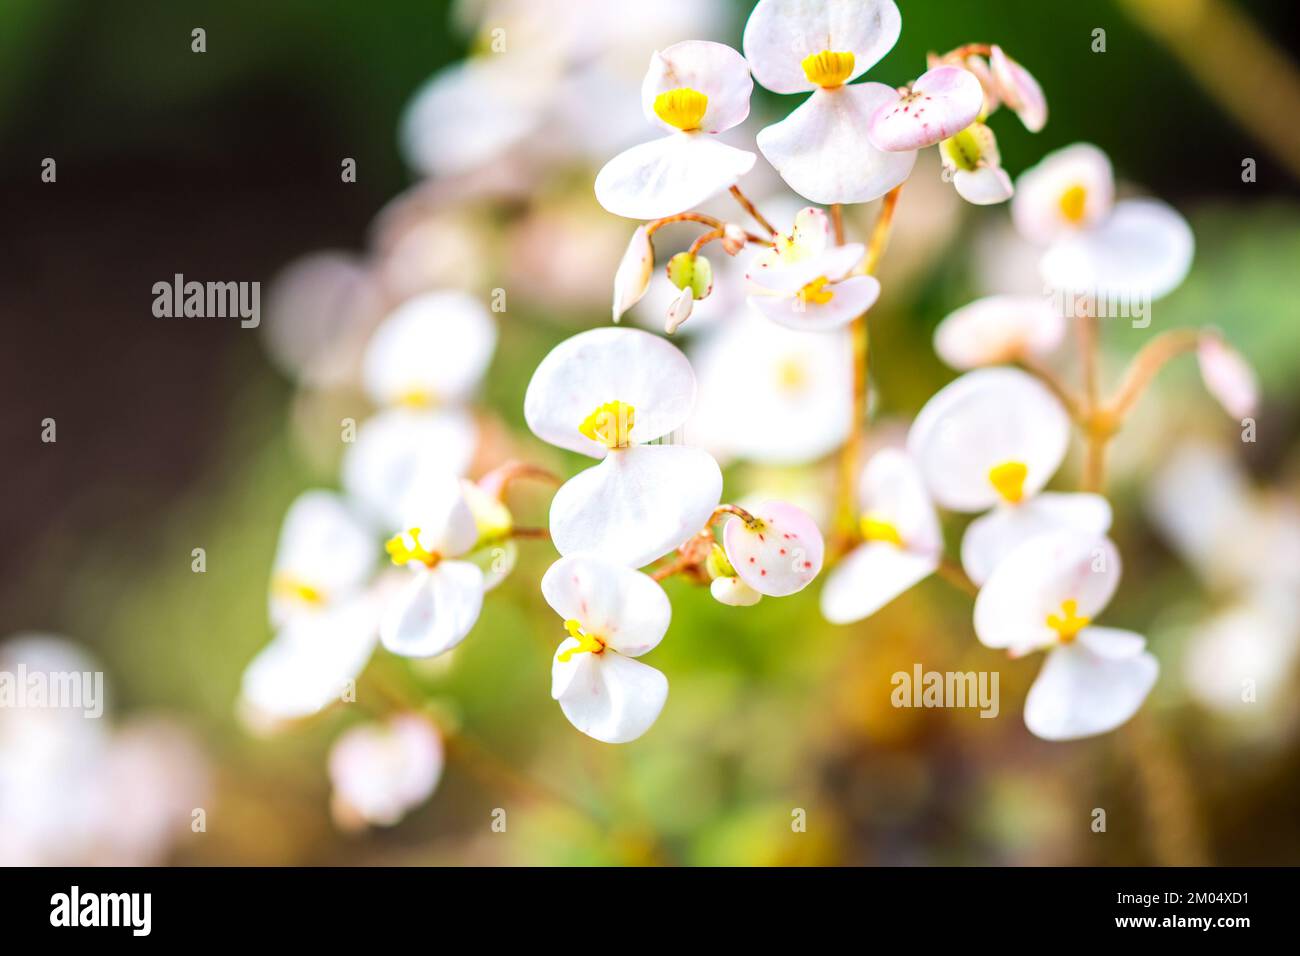 Detail of small white blossoms. Fresh white blossom on the blurred background Stock Photo